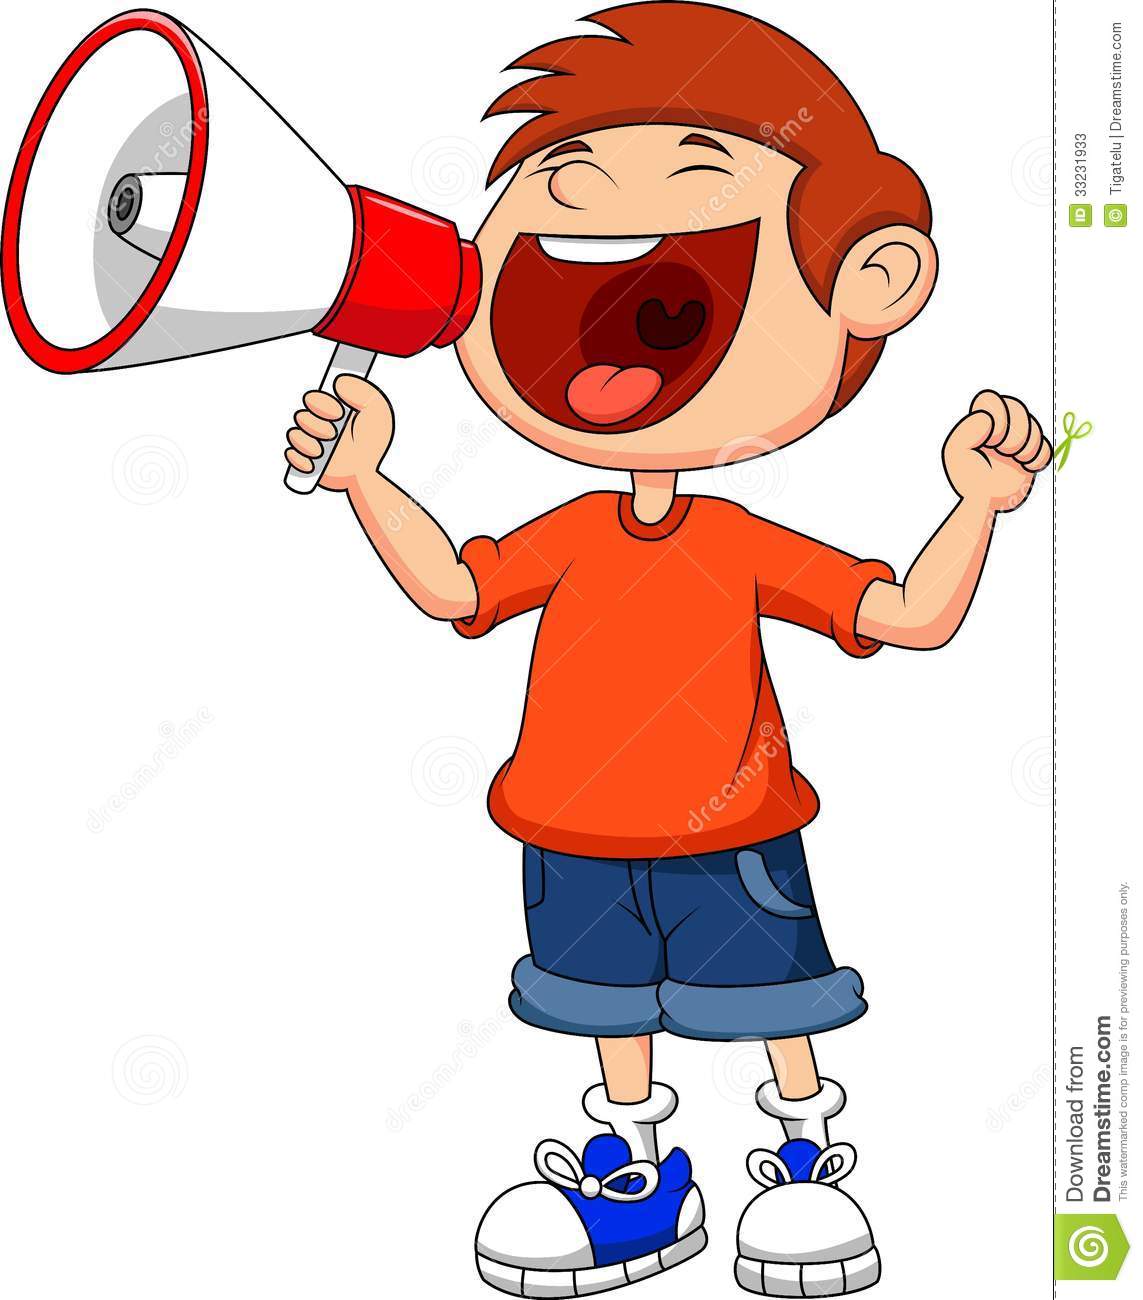 YELLING IN MEGAPHONE CLIPART IMAGE.